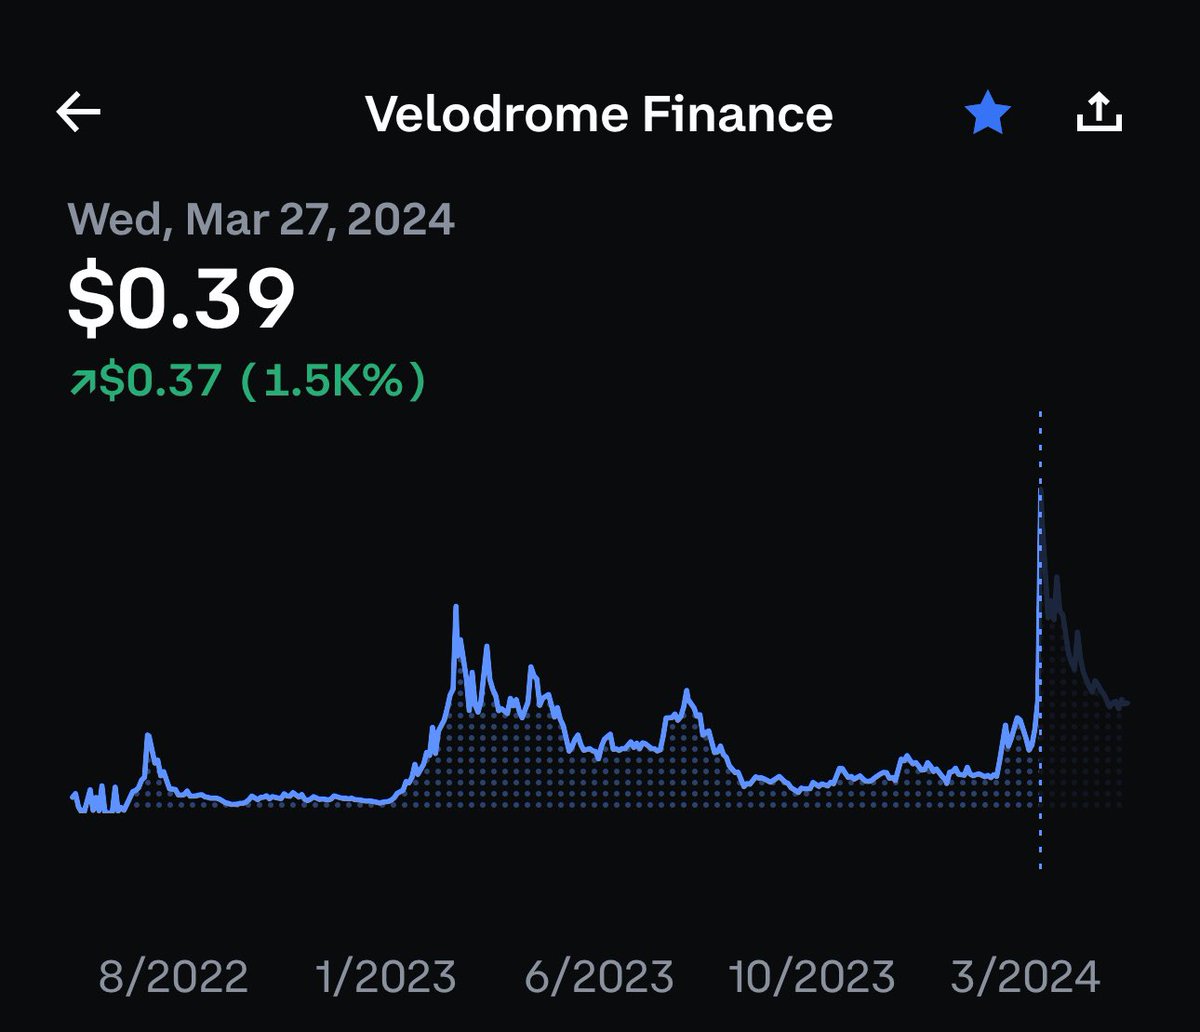 It has been 2 months since Velodrome ATH of 39c. an easy 3x undervalued coin preparing for a run up like $AERO 
It’s just a matter of time and I believe that time is very soon. 
$VELO $veVELO @VelodromeFi